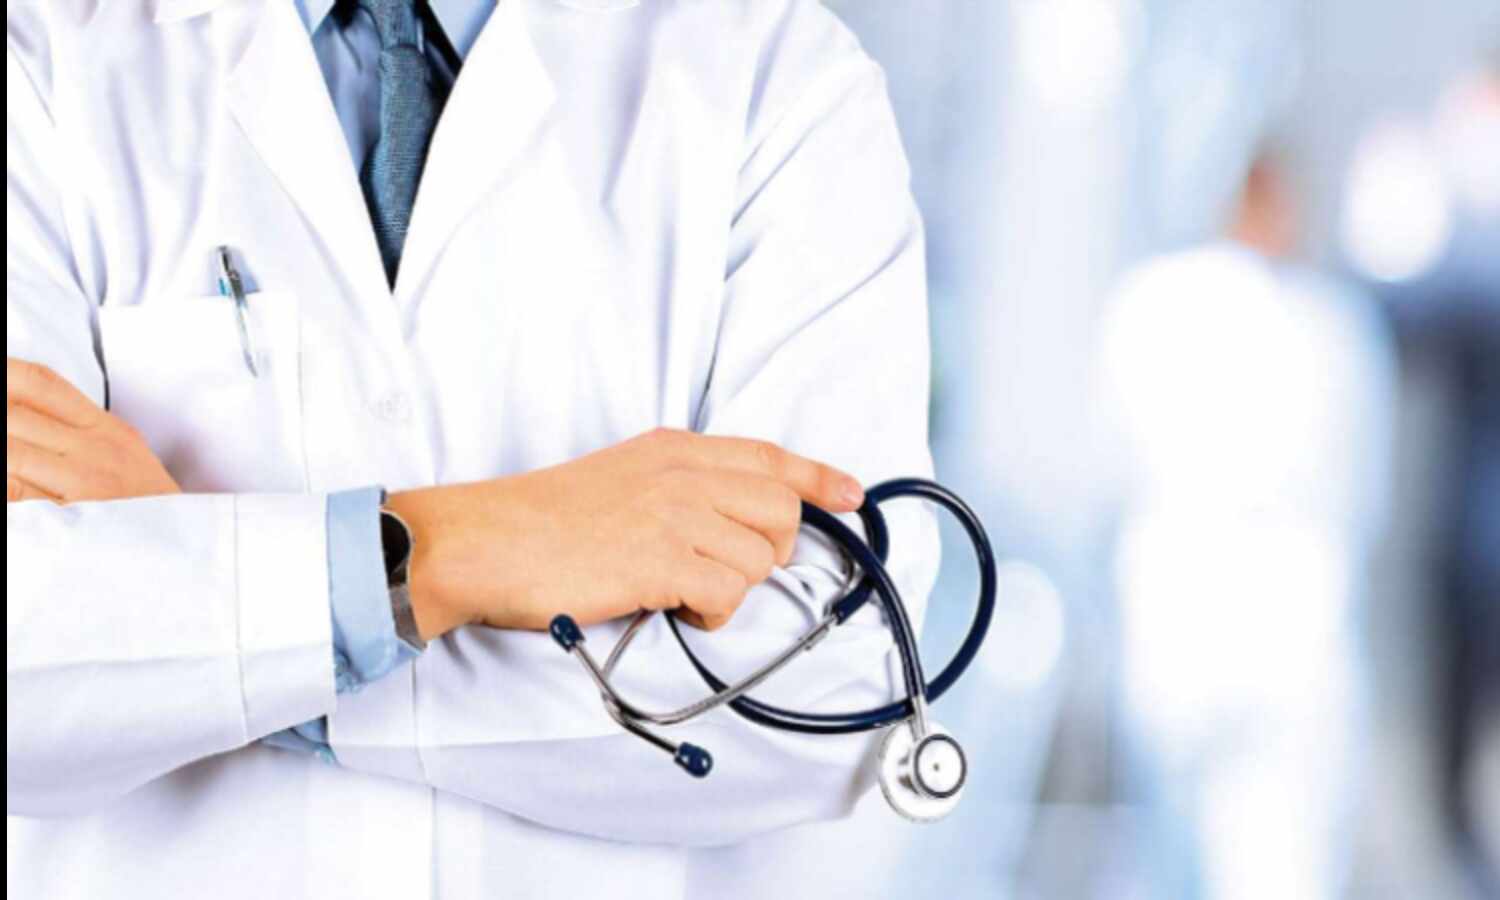 more than 12.5 lakh doctors in india, only 3.71 lakh specialists: health minister tells parliament